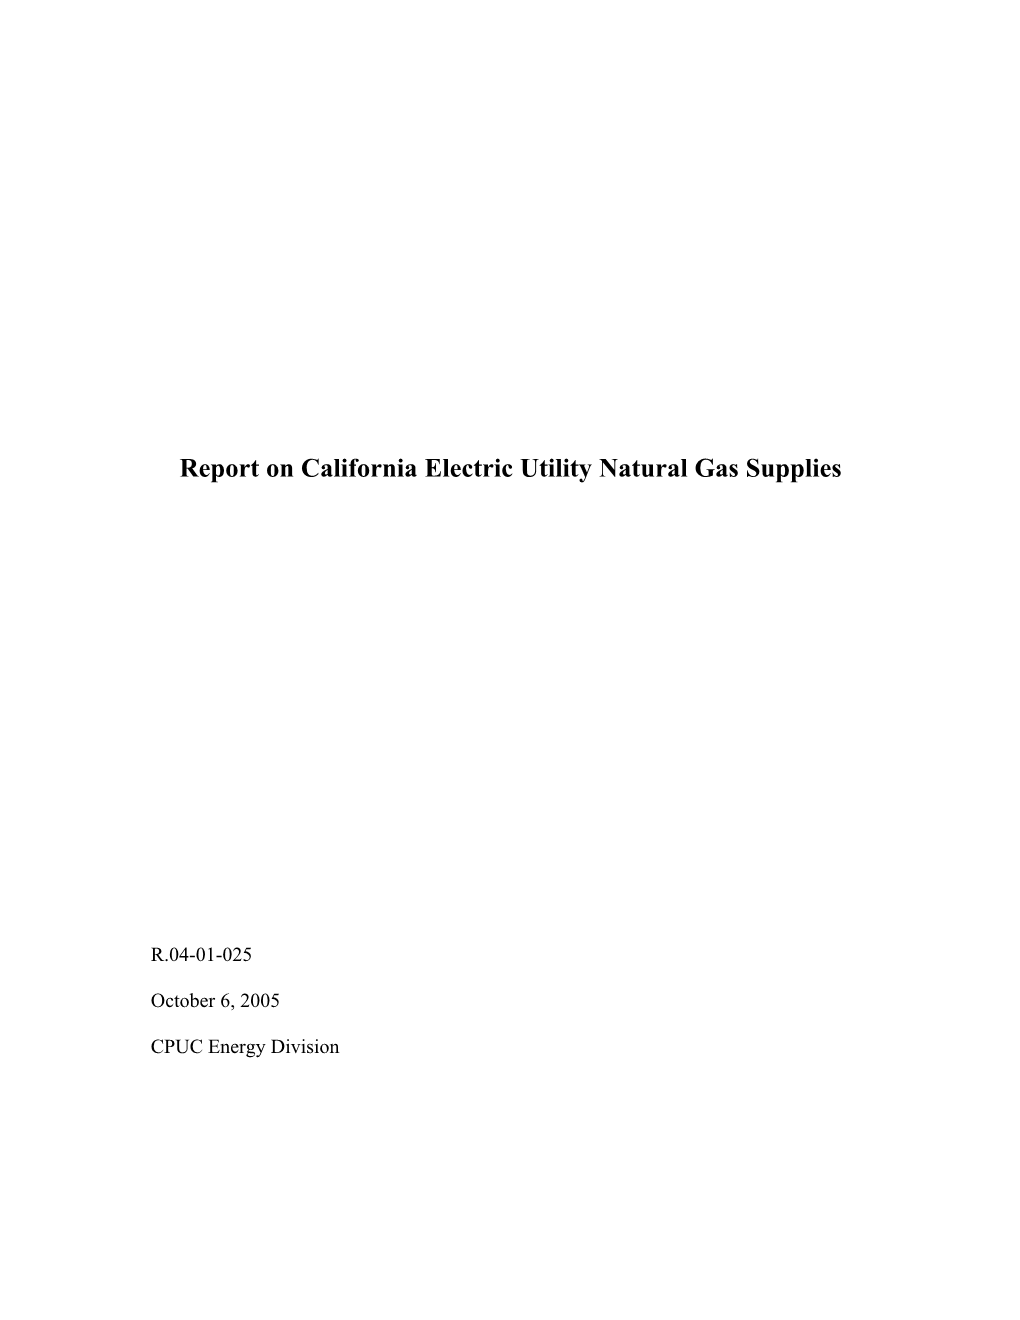 In Addition, in Order to More Fully Understand the Adequacy of the California Natural Gas